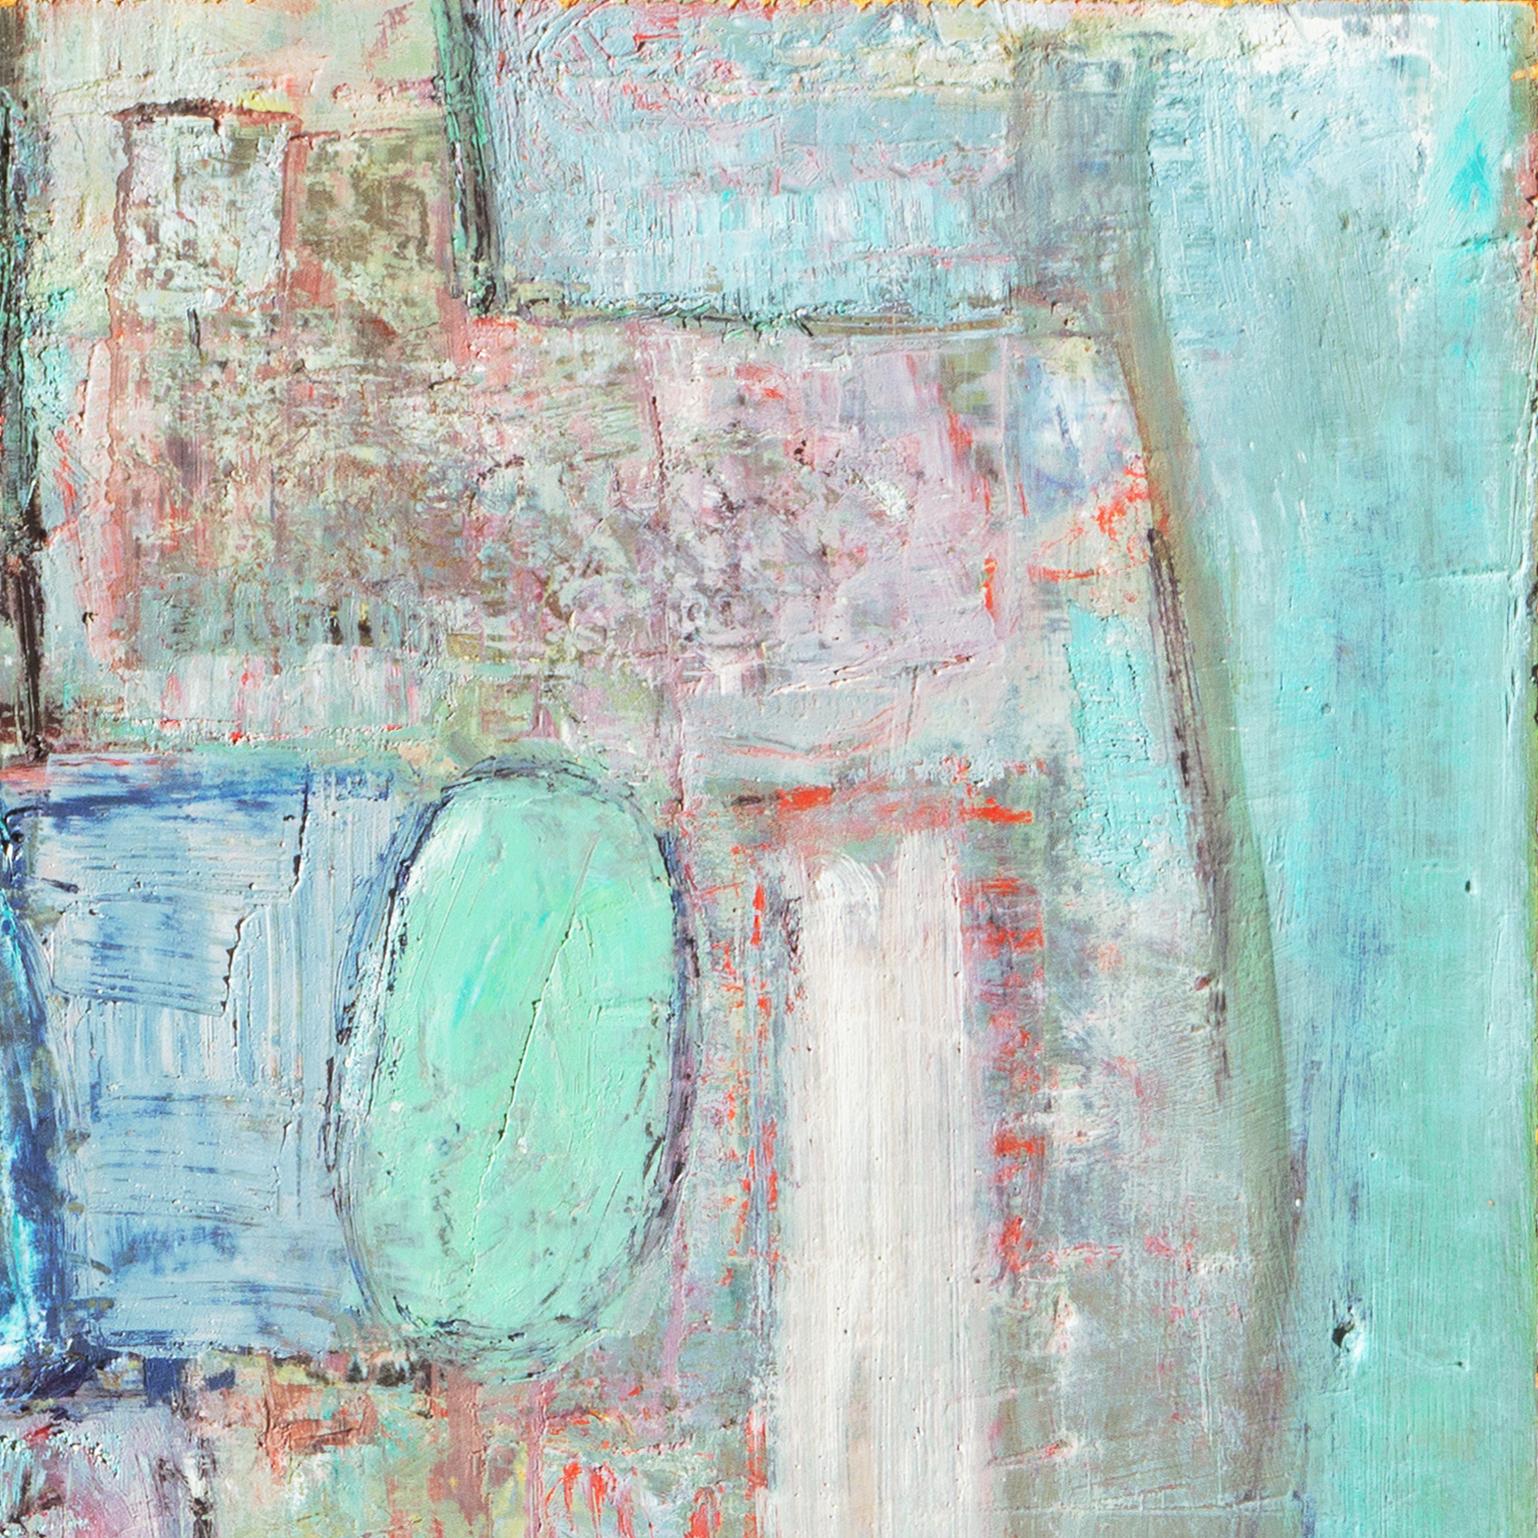 'Abstract, Turquoise and Rose', Paris Modernist, Guggenheim, Benezit, Italy - Blue Abstract Painting by Aage Vogel-Jorgensen